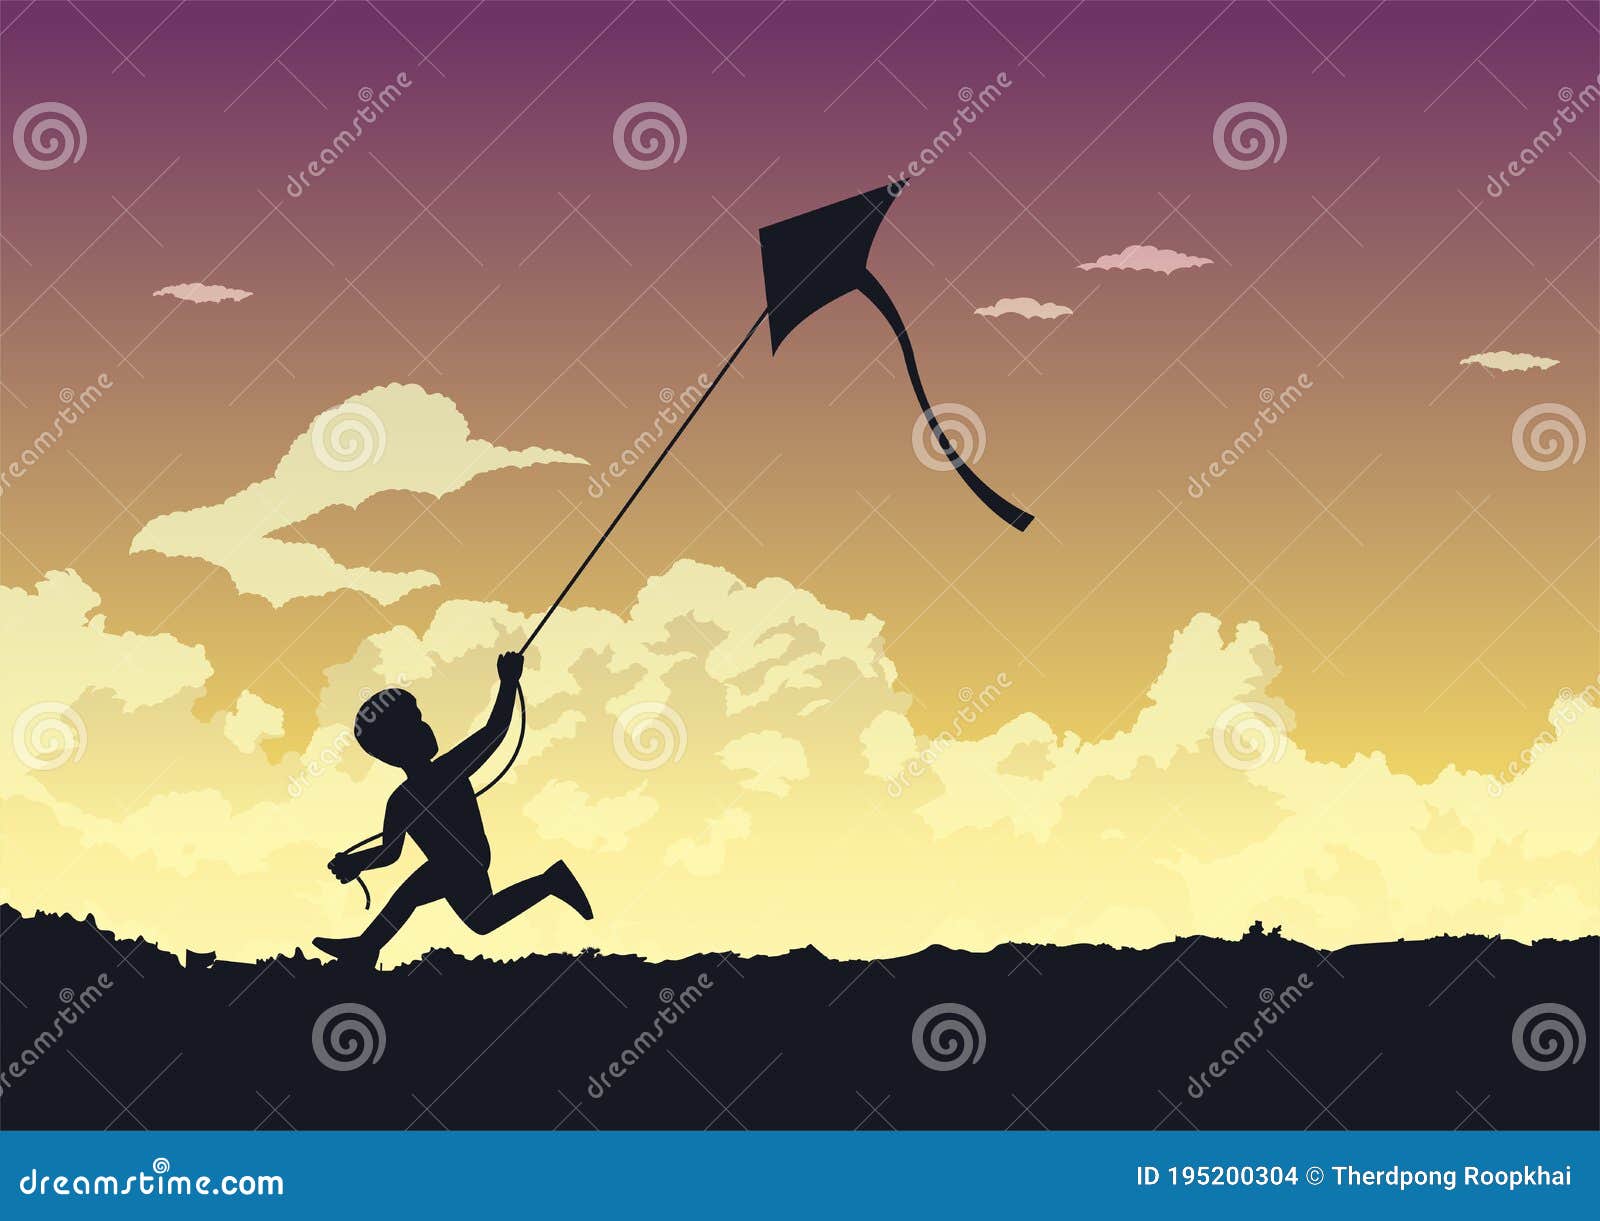 People Avtivity and Life Scene of a Boy is Running To Play His Kite ...